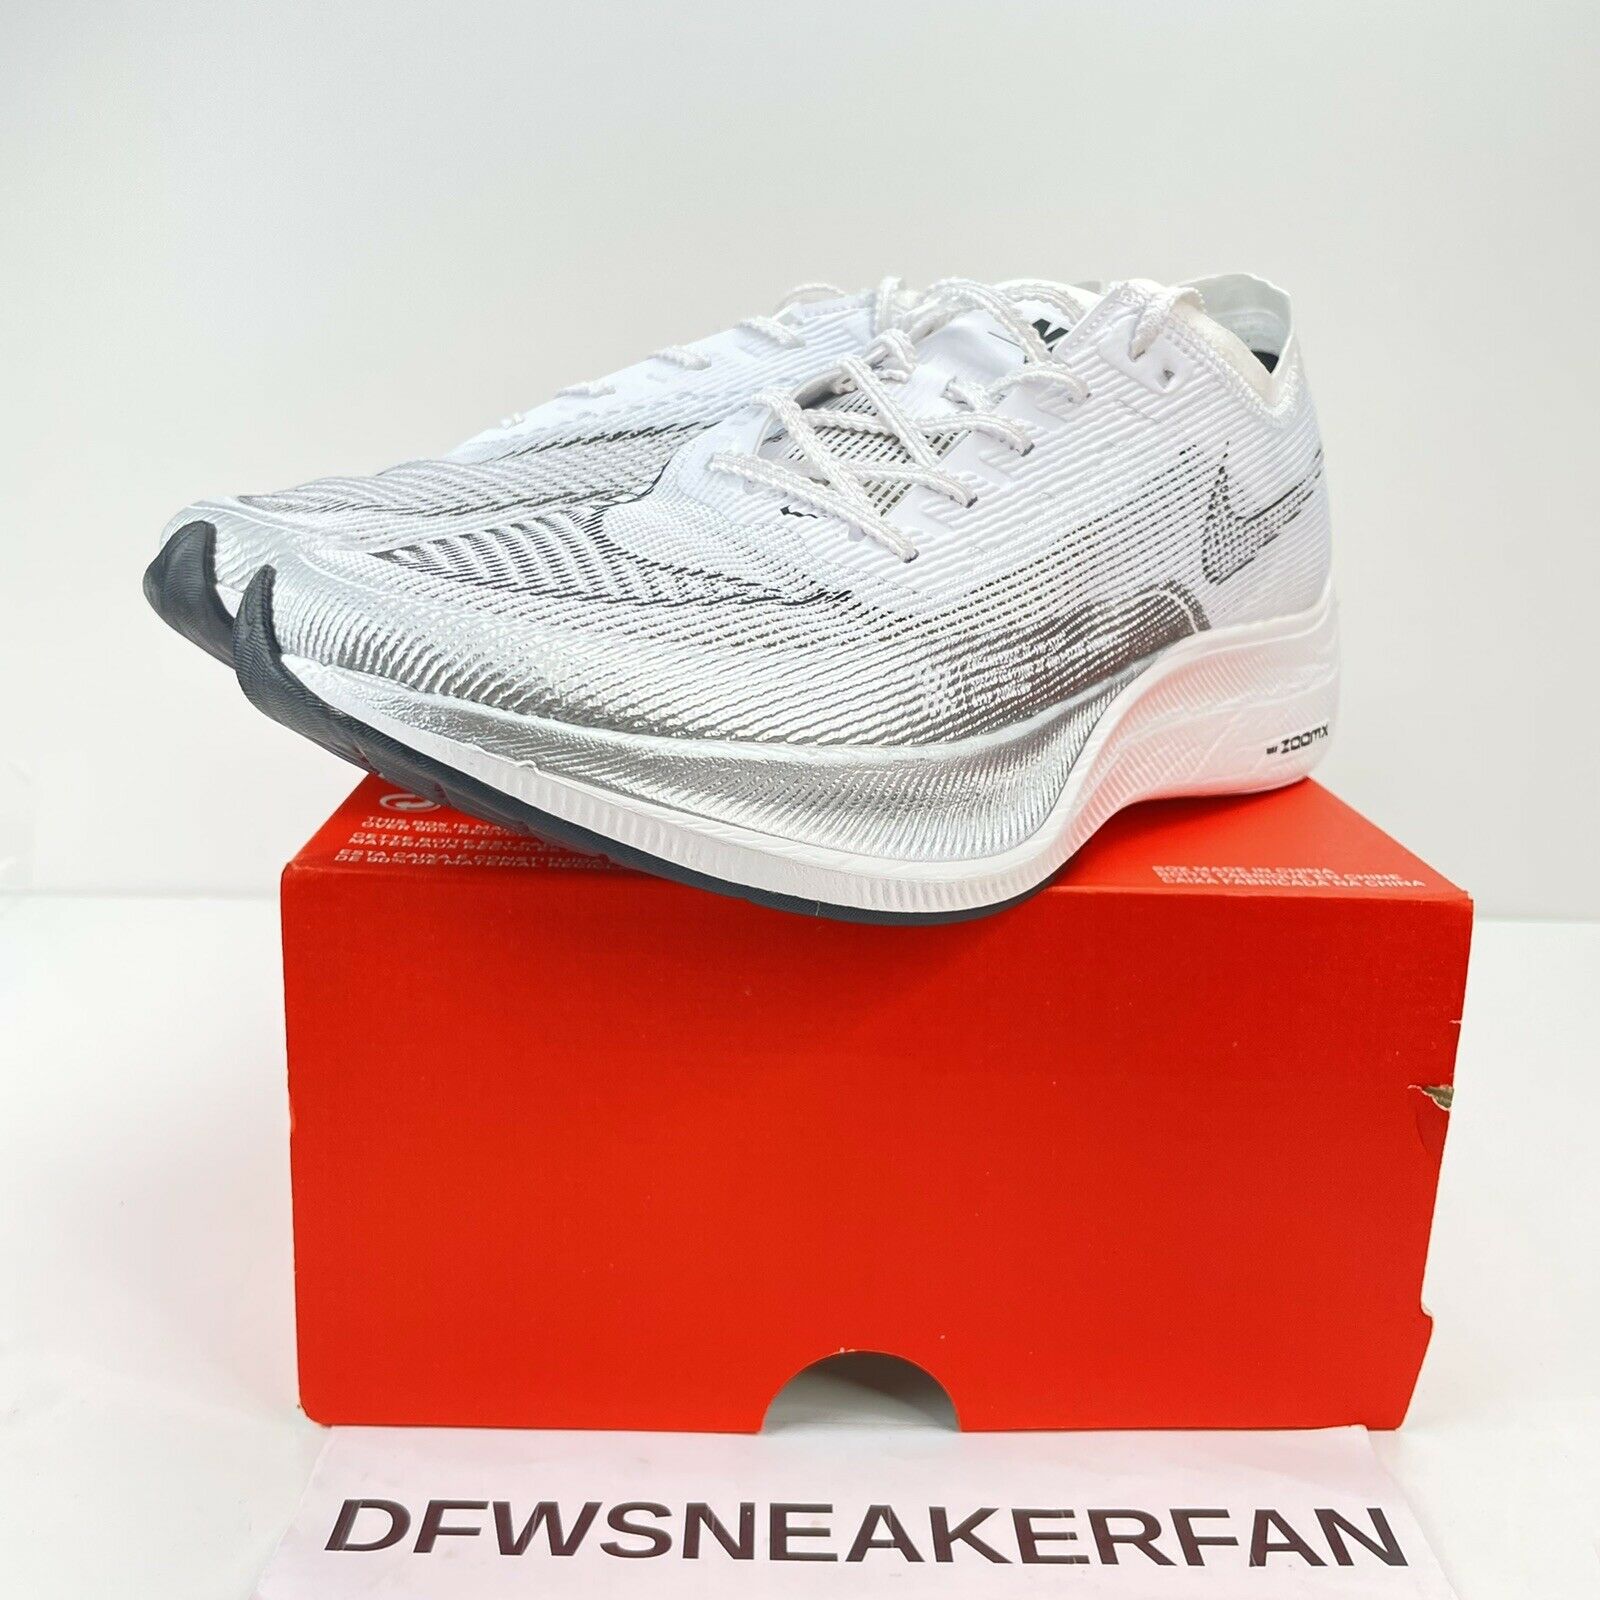 Nike ZoomX Vaporfly Next% 2 CU4111-100 Men’s 9 White Silver Shoes New